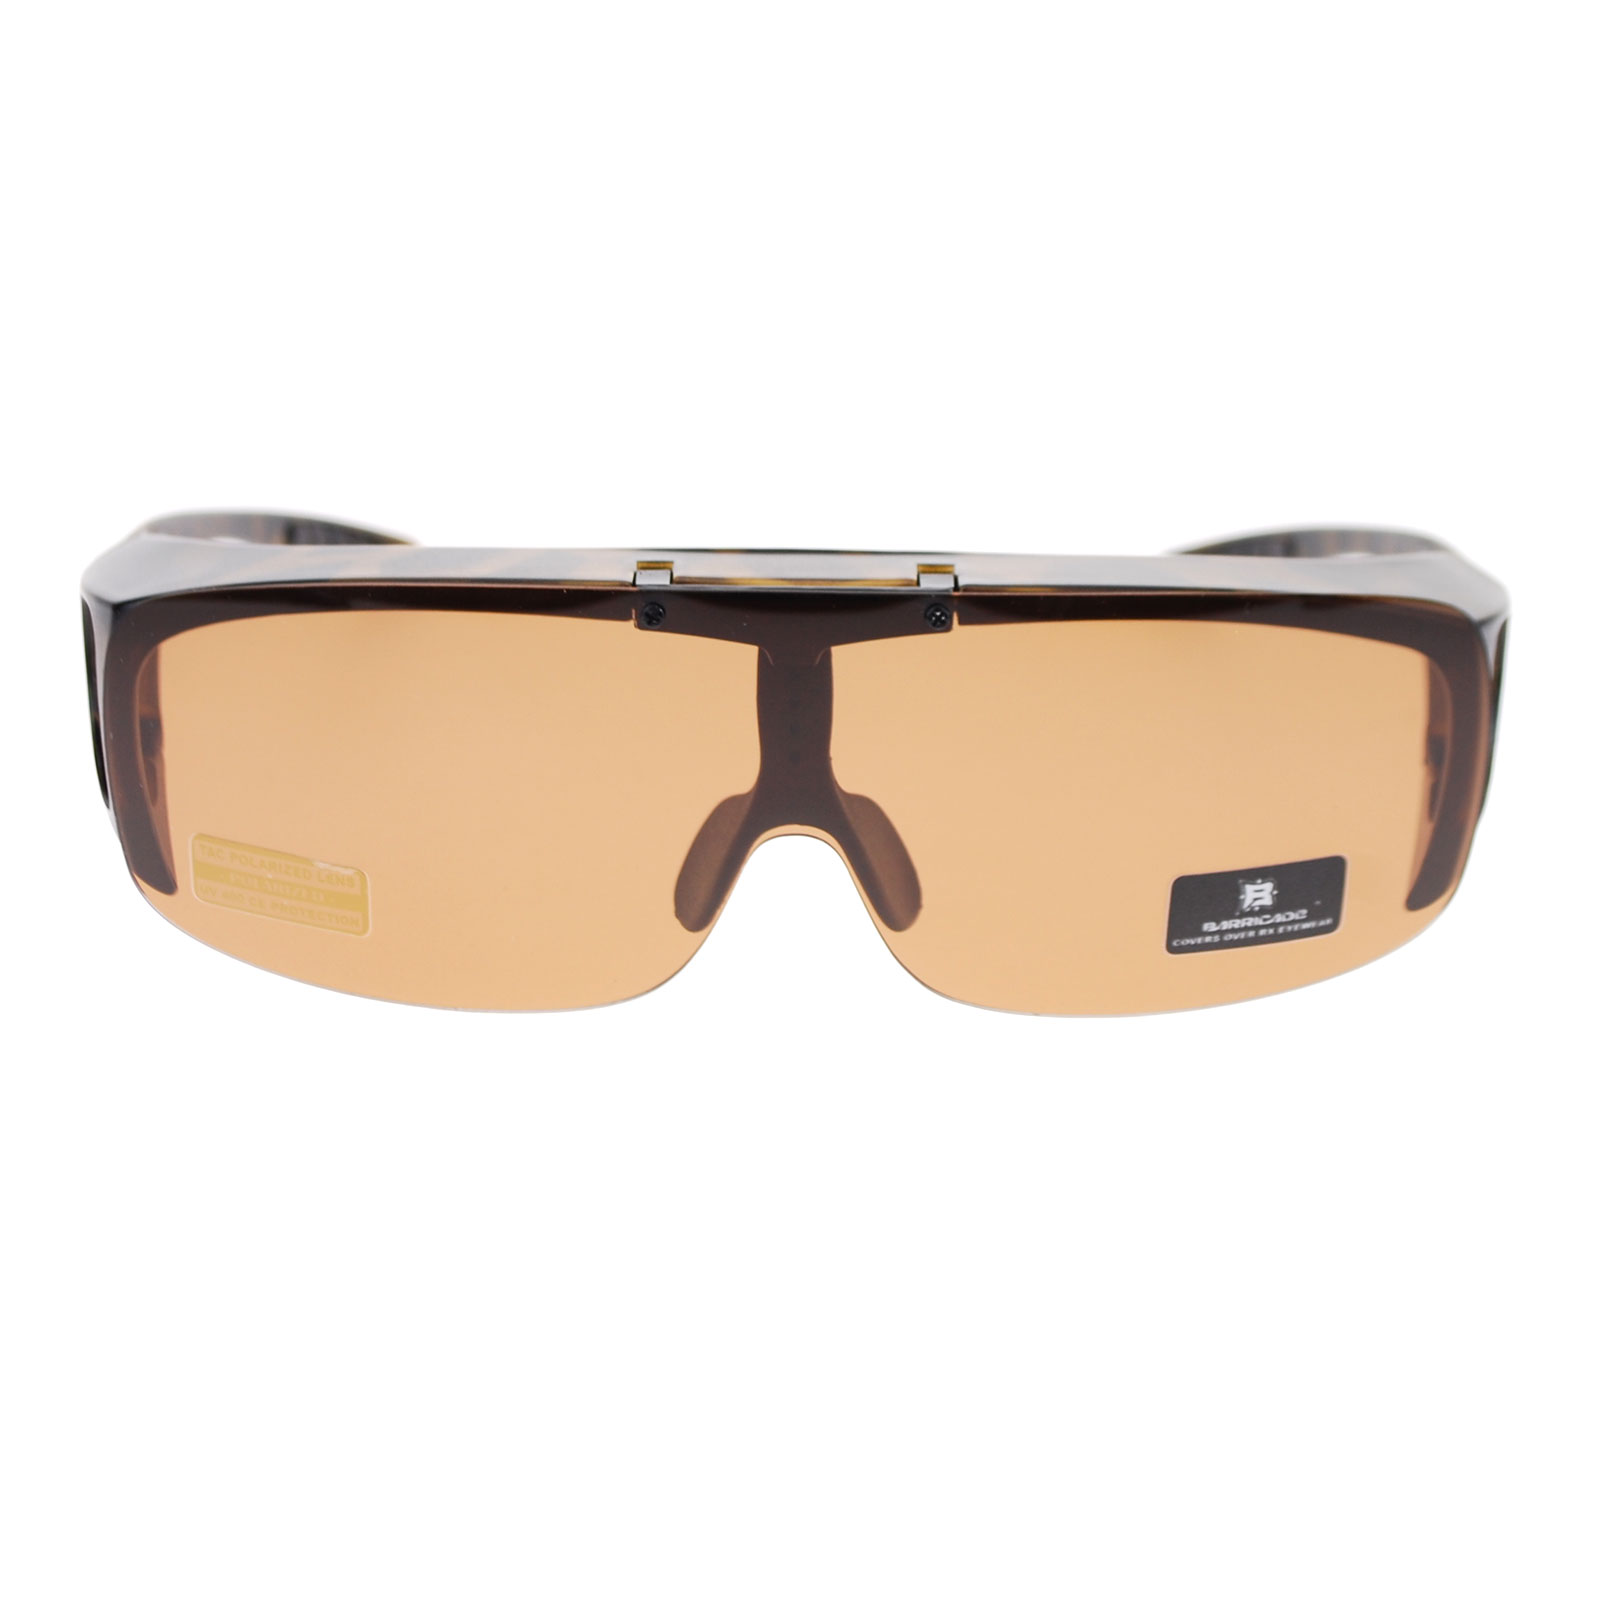 Barricade Large Mens Polarized Flip Up Fitover Sunglasses Tortoise Brown - image 2 of 3